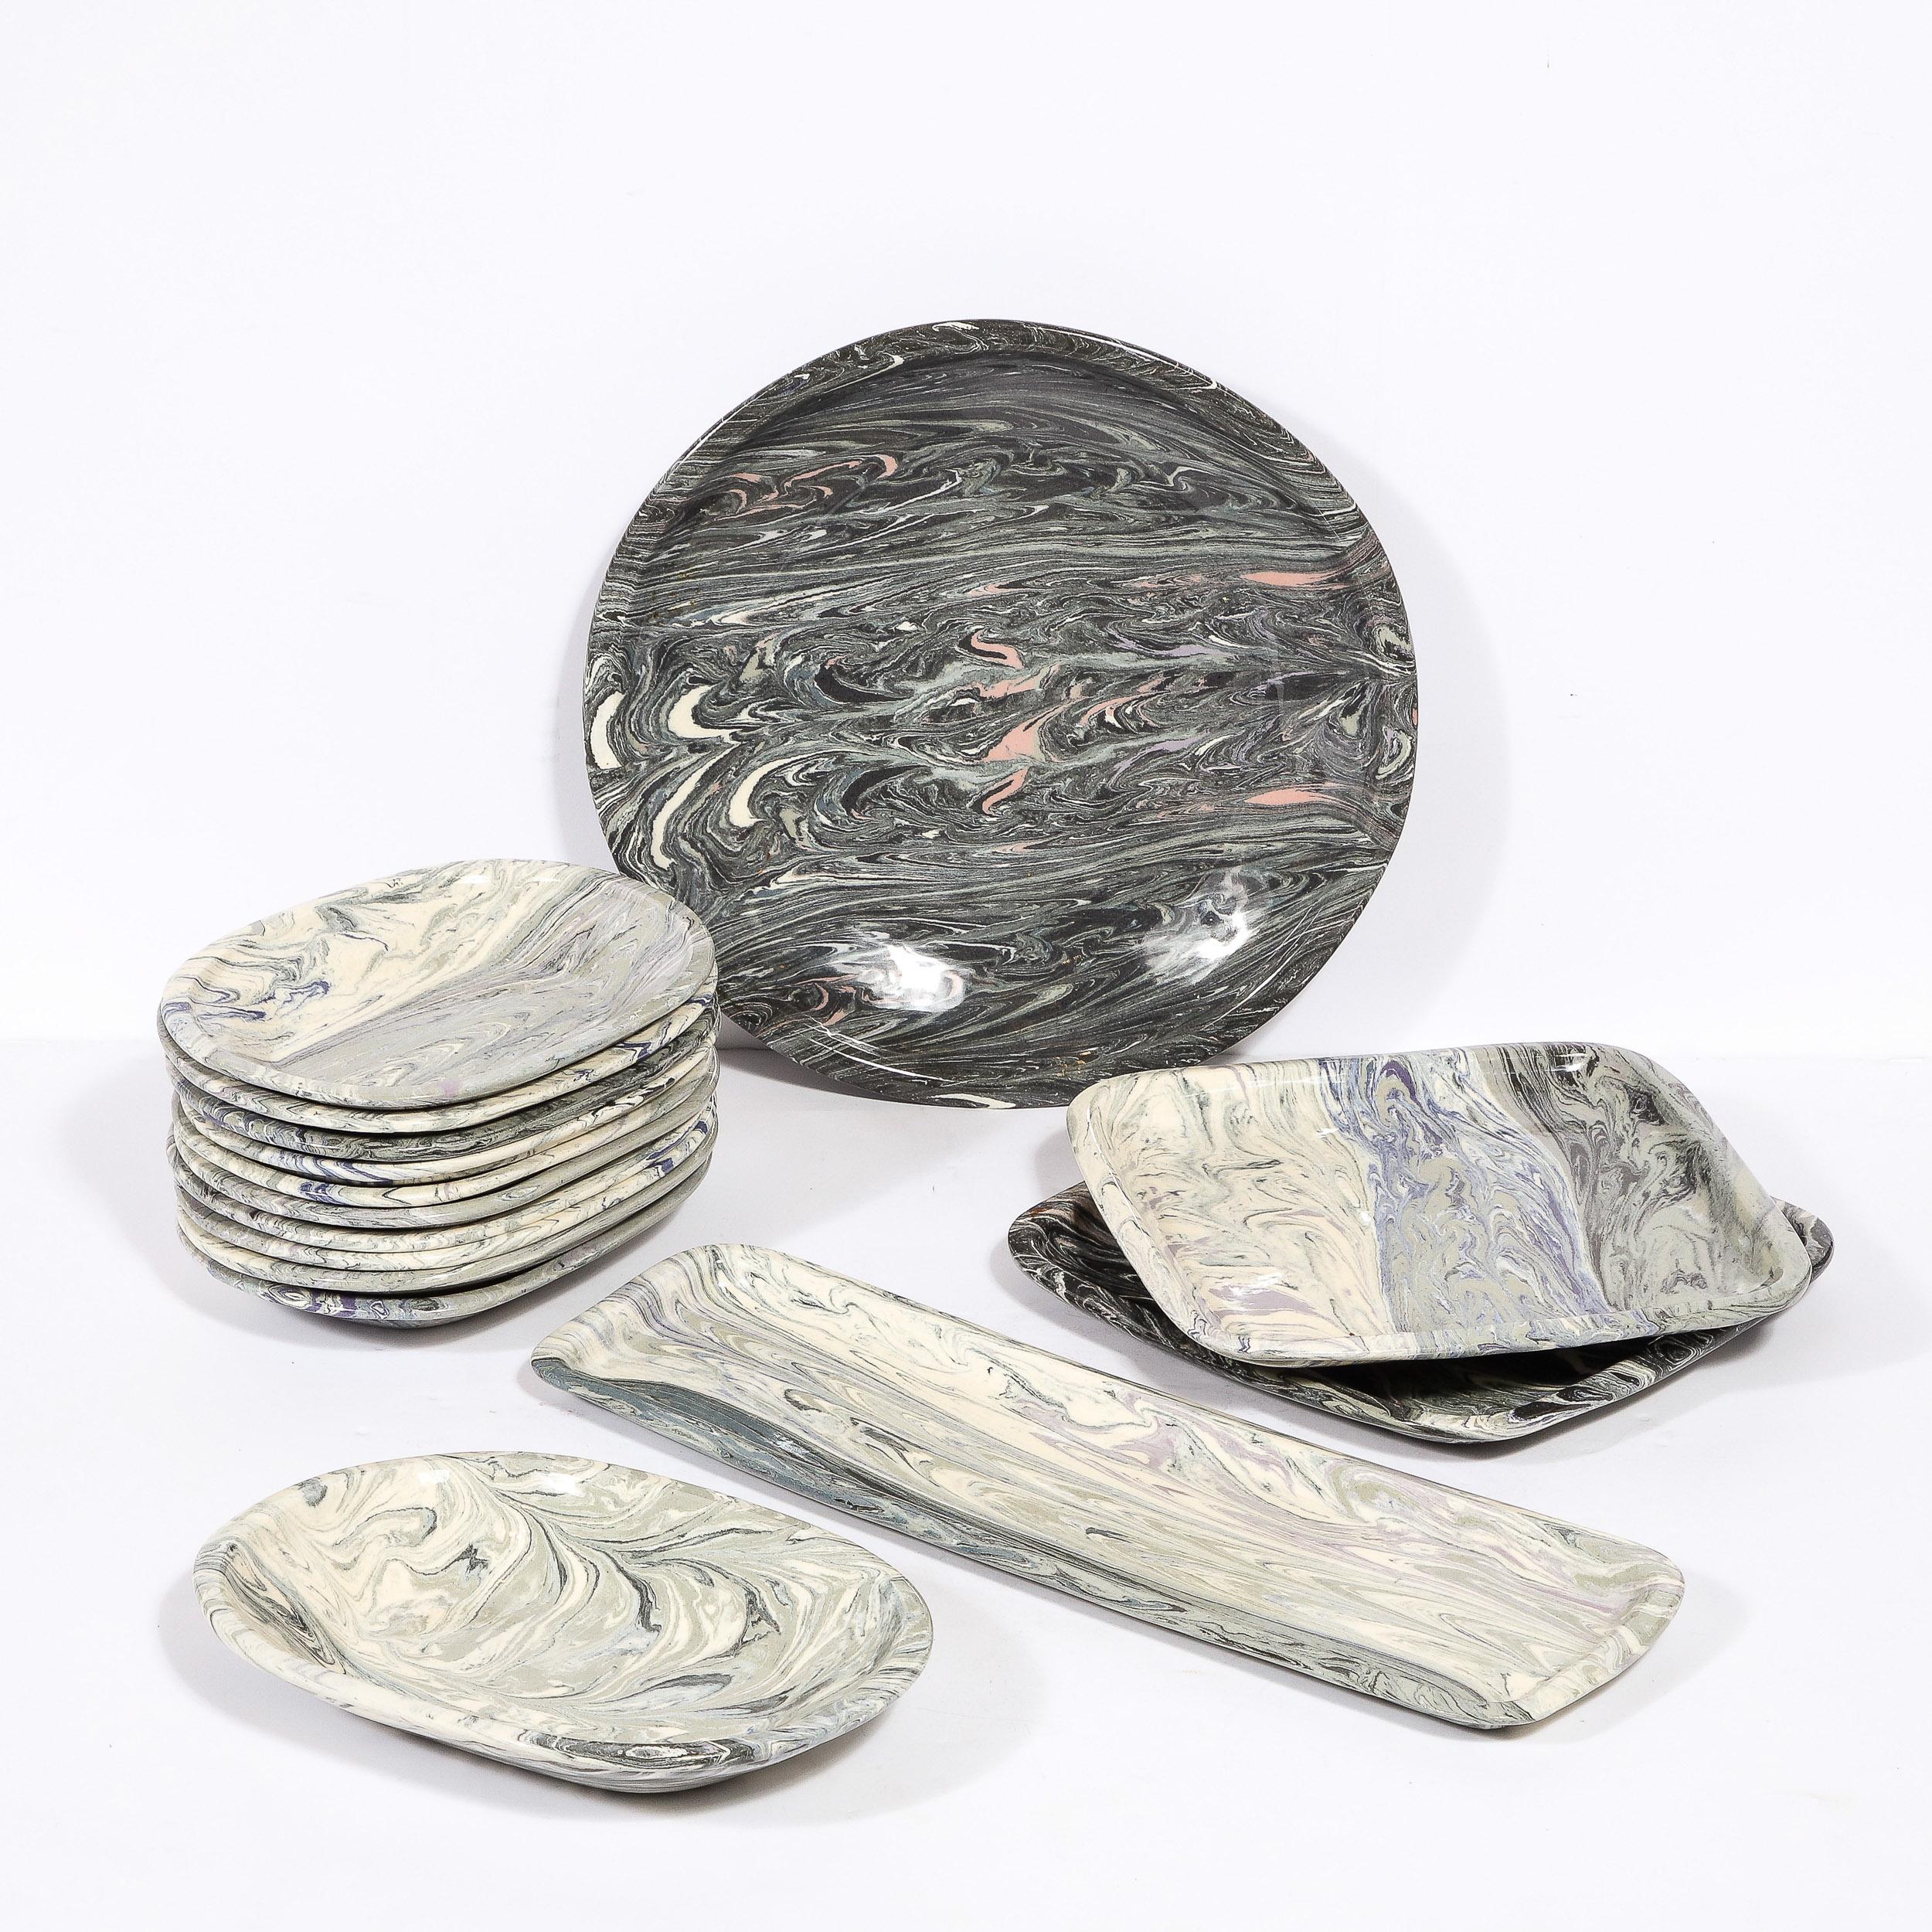 This sophisticated modernist set of 23 dinner and salad plates, as well as serving platters were realized by the esteemed designer Jurg Lanrein in Switzerland during the latter half of the 20th century. They offer an organic marbled texture-